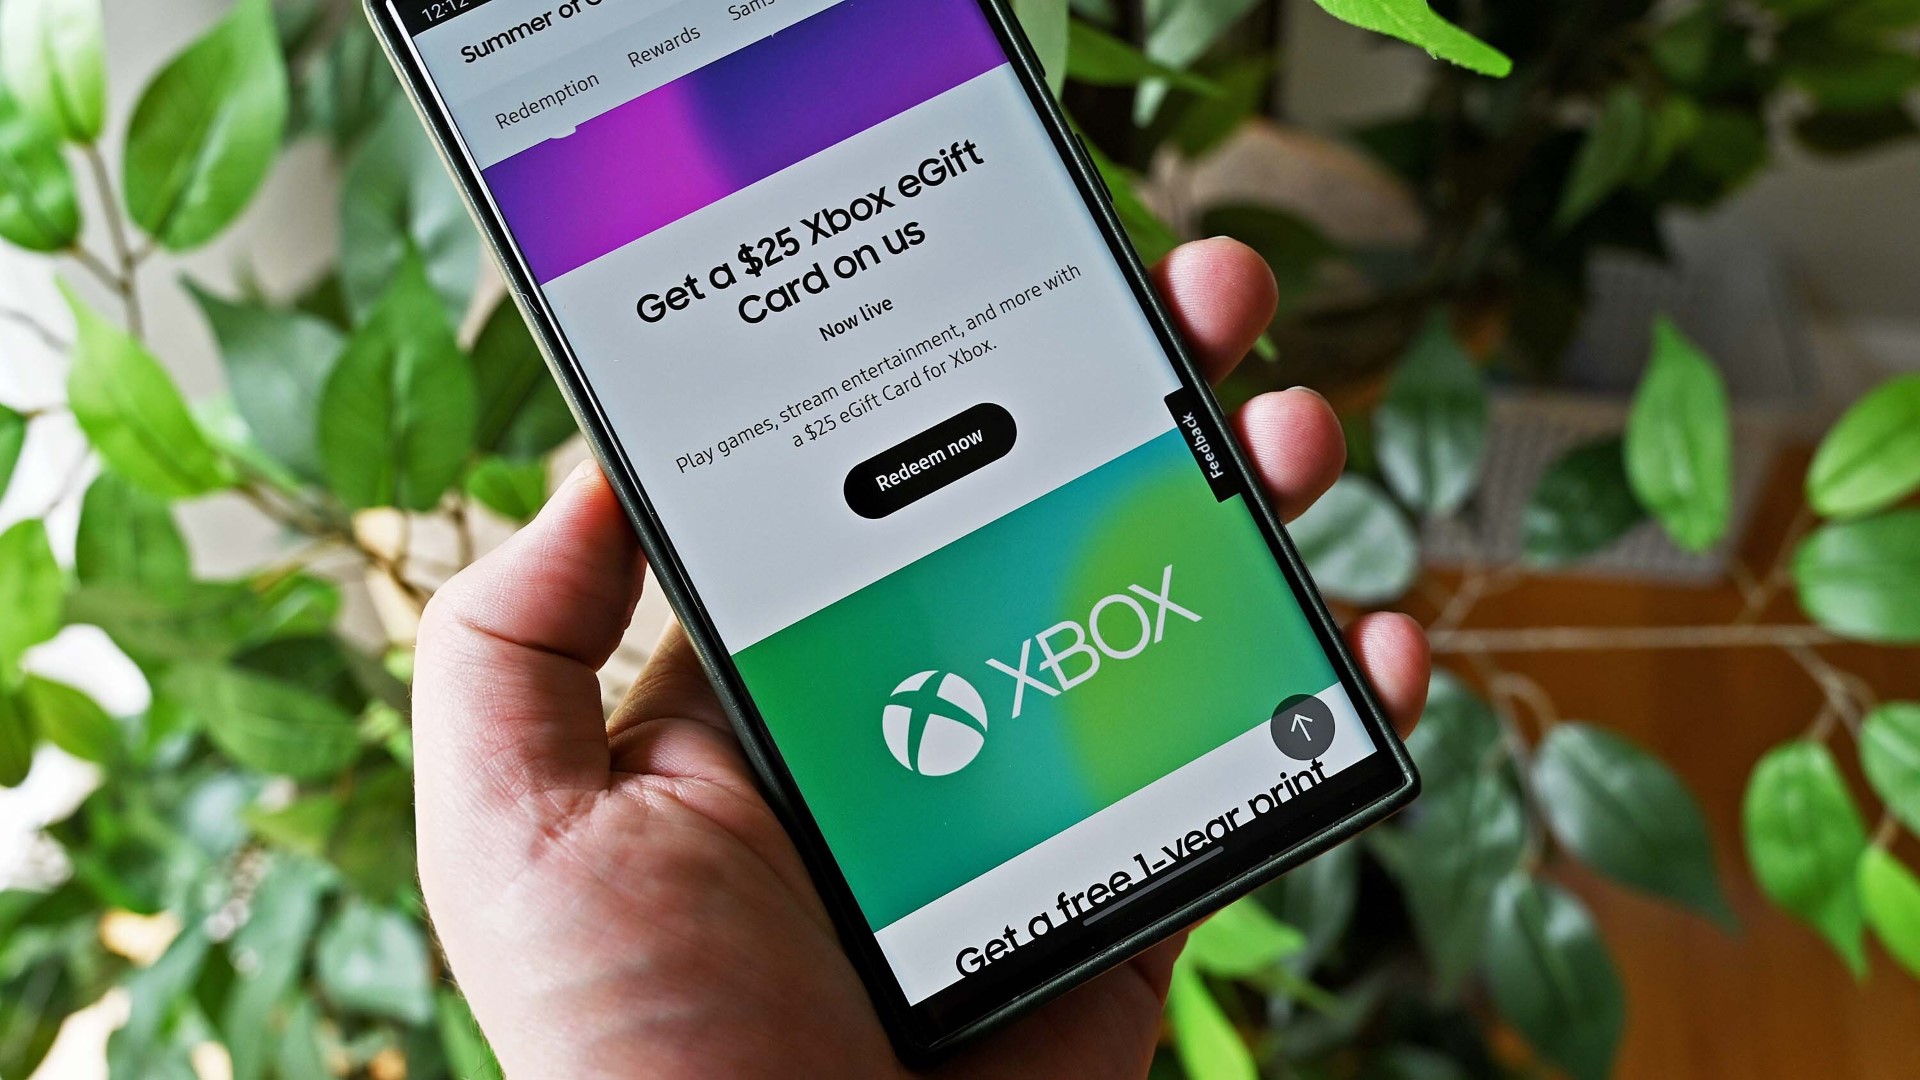 Xbox free voucher on Samsung mobile phone